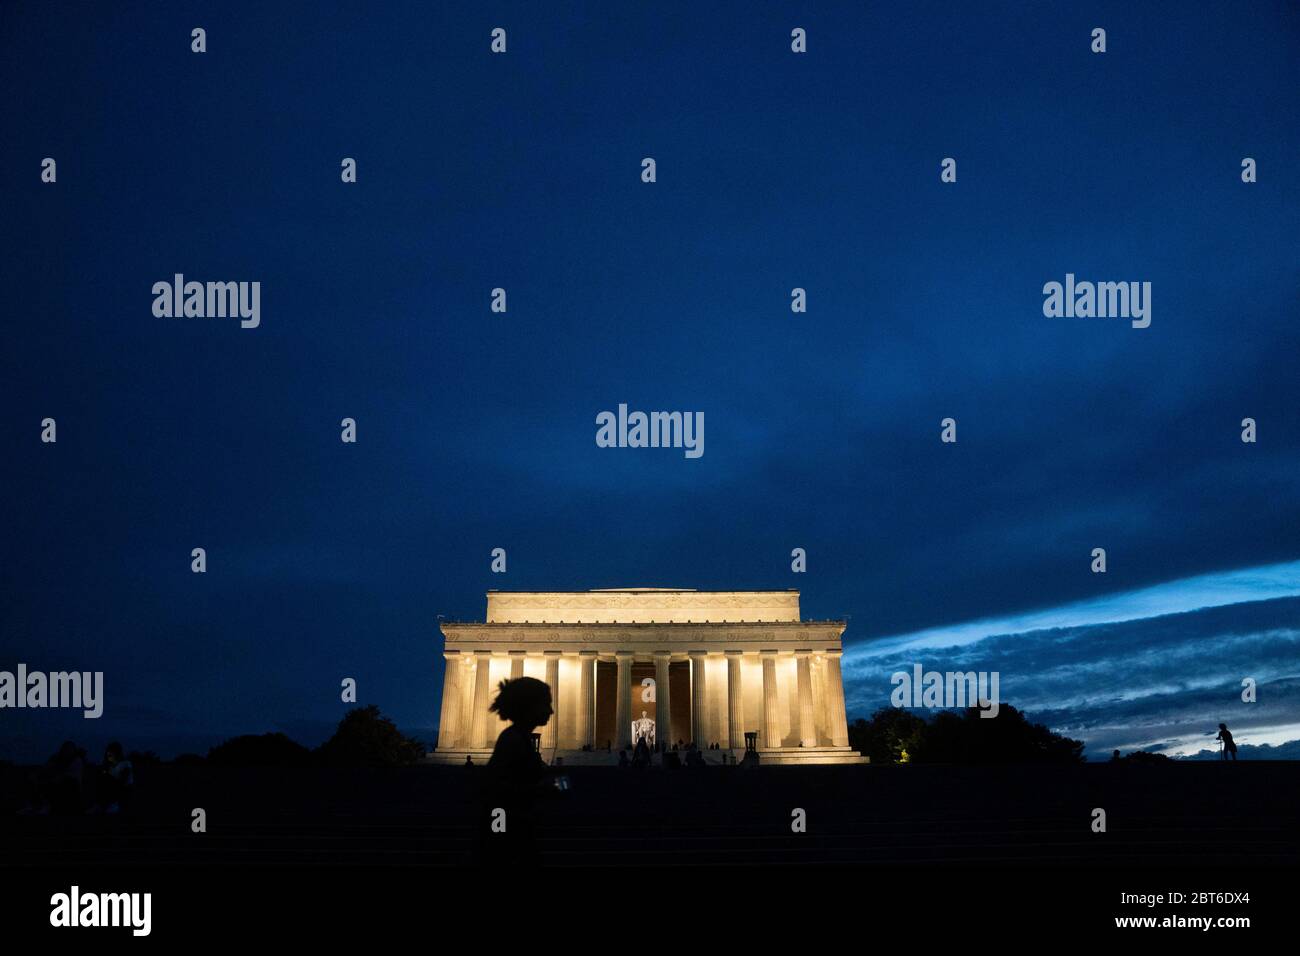 Washington, USA. 22nd May, 2020. People visit the Lincoln Memorial in Washington, DC, the United States, on May 22, 2020. As of Friday night, the United States has reported over 1.6 million cases of COVID-19, according to Johns Hopkins University. Credit: Liu Jie/Xinhua/Alamy Live News Stock Photo